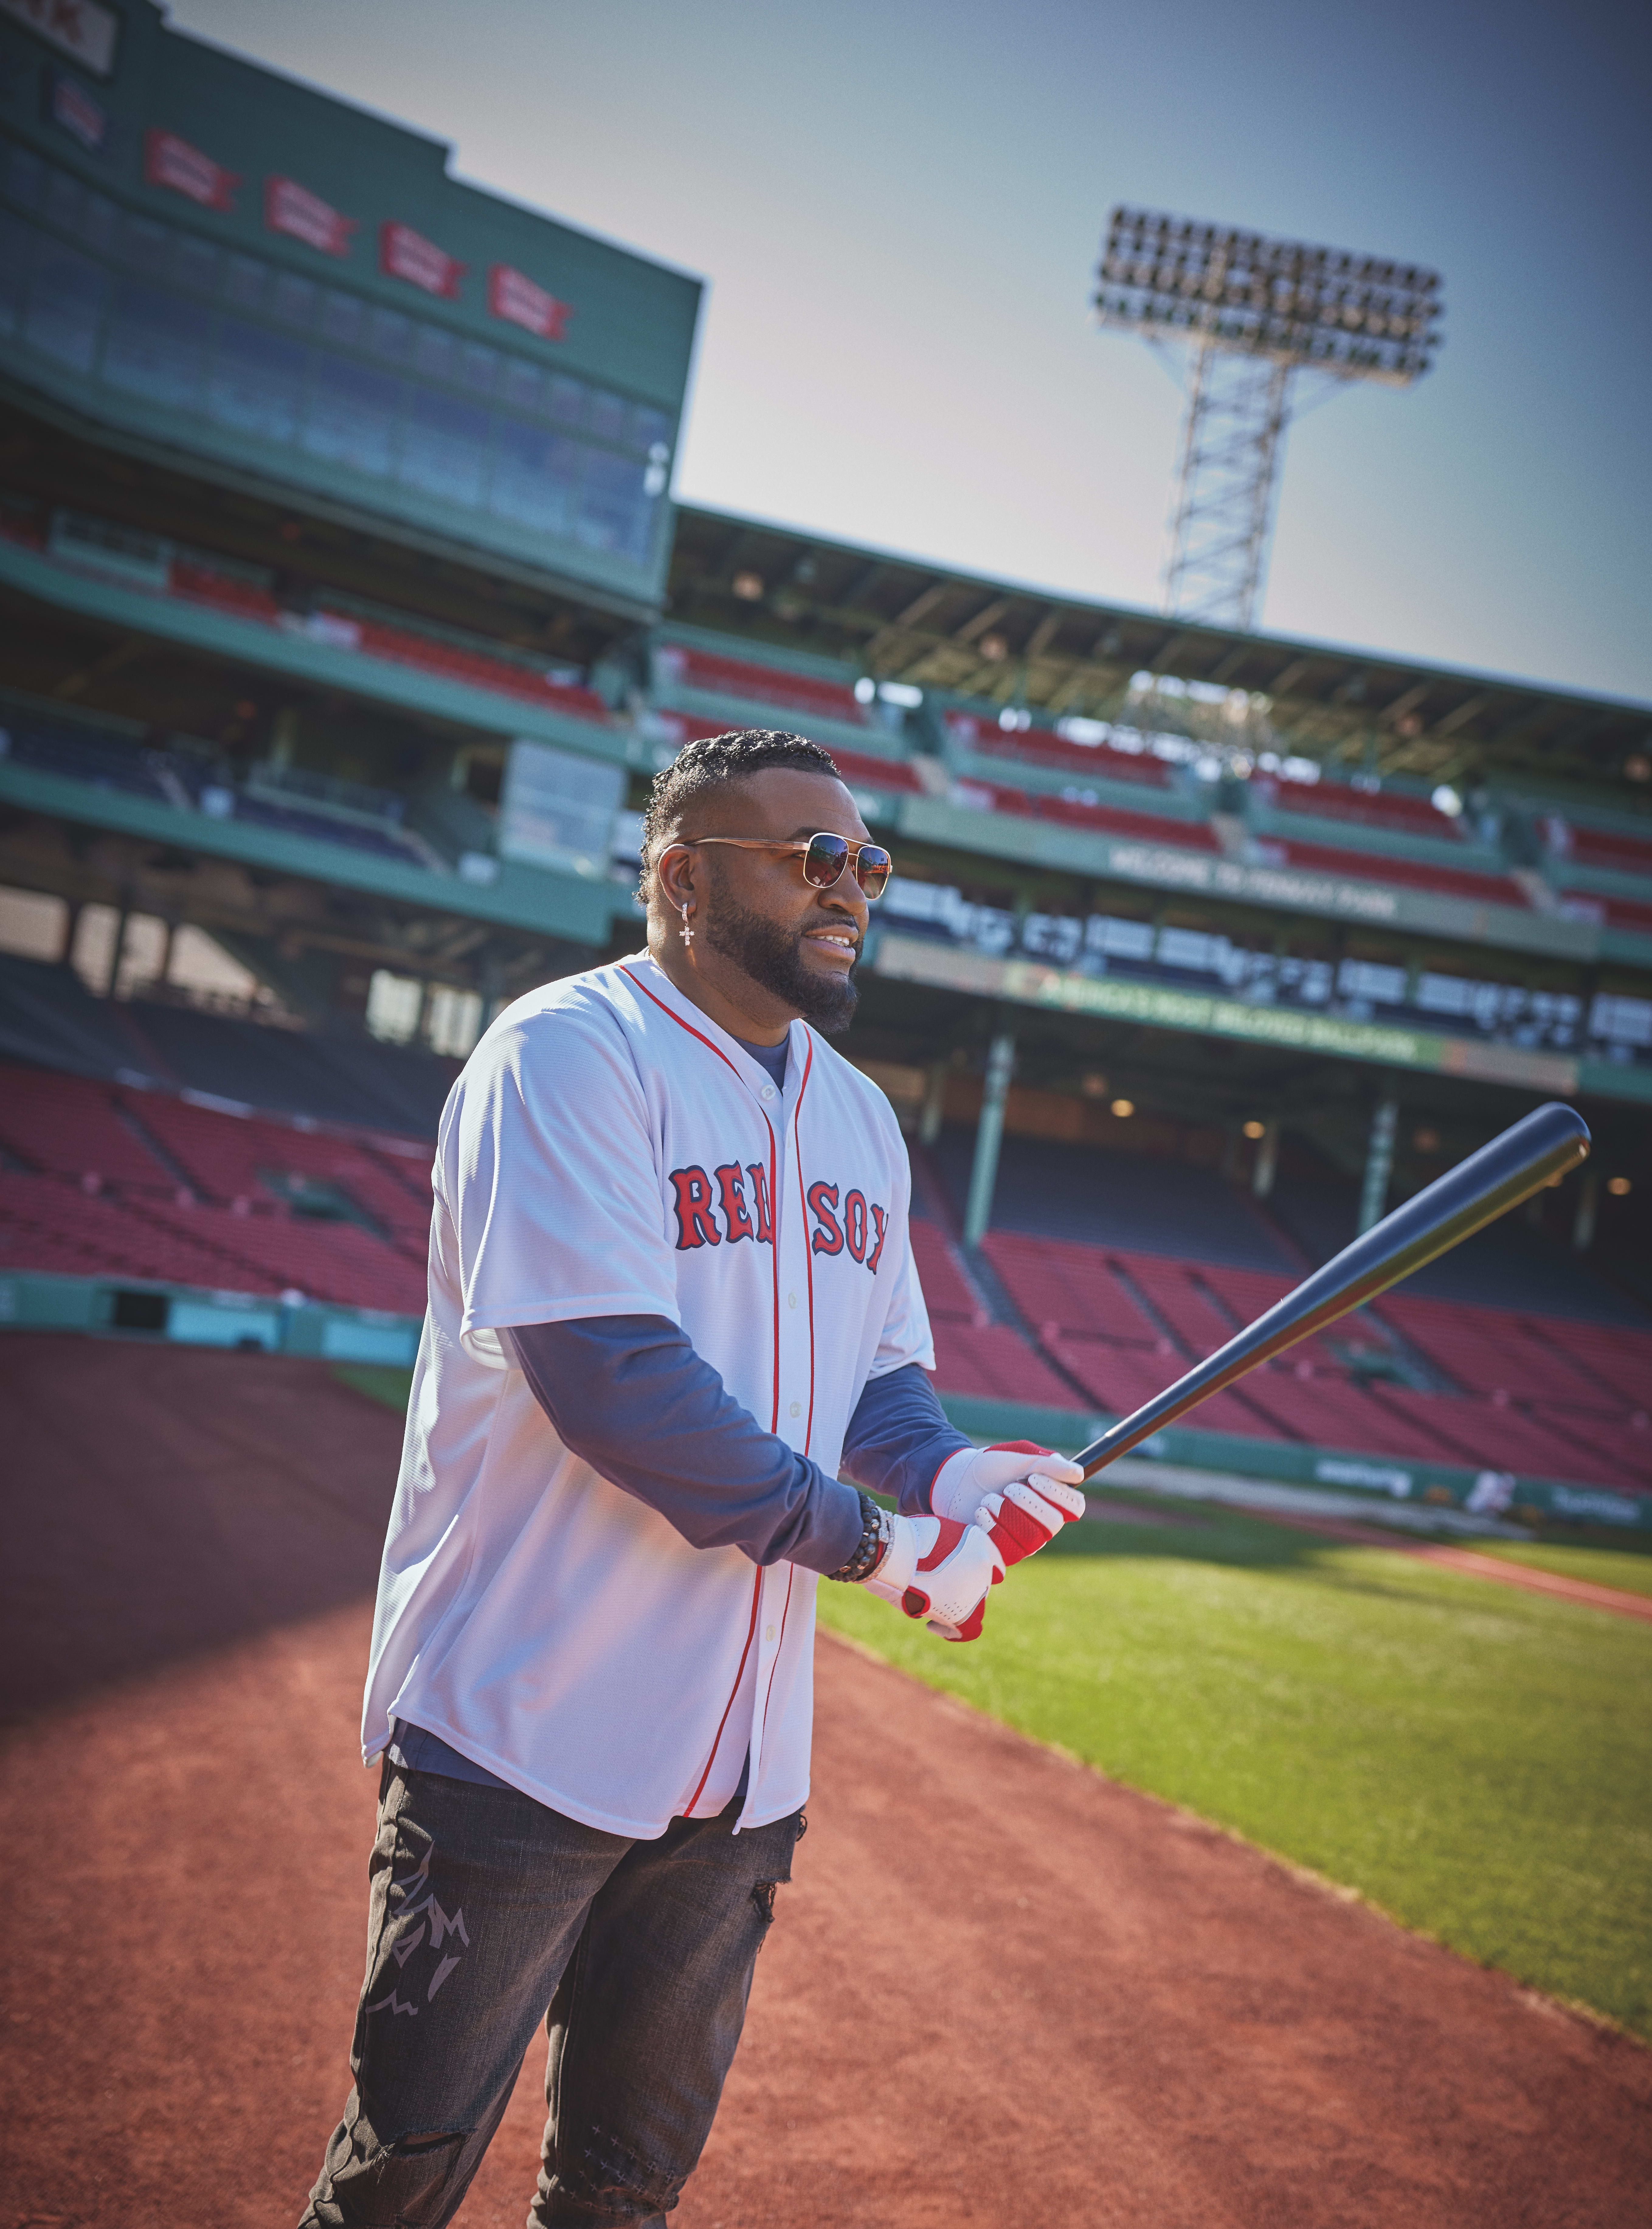 David Ortiz Hall of Fame Induction: Reliving his legendary 2013